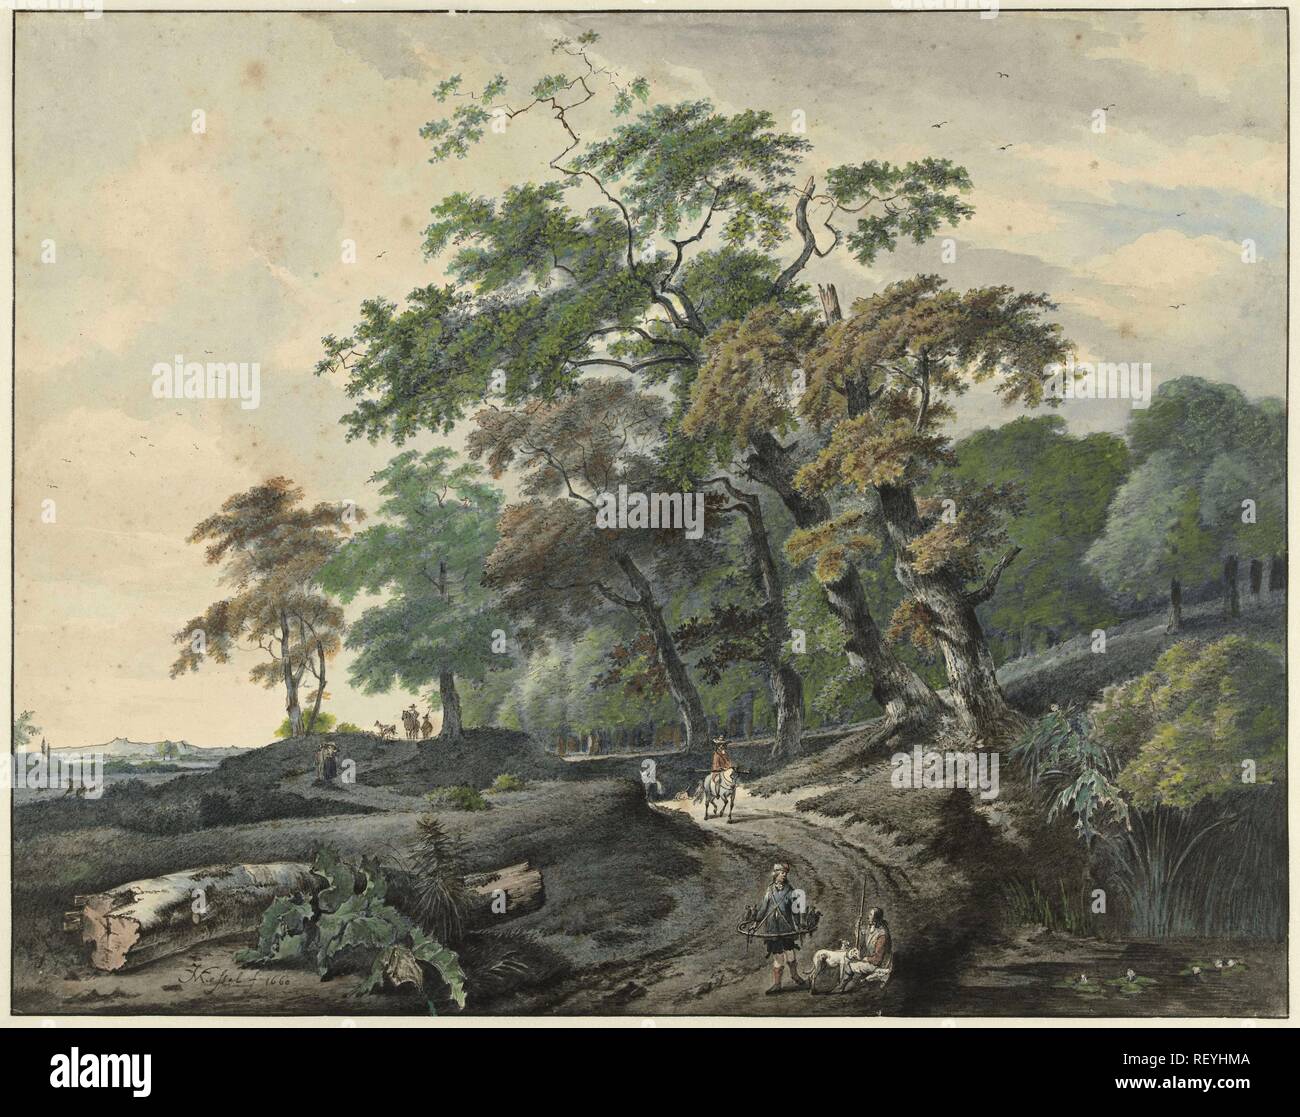 Landscape with a road through a forest and a falcon hunter. Draughtsman: Gerard van Nijmegen. After Jan van Kessel (1641-1680) (mentioned on object). After Johannes Lingelbach. Dating: 1801. Measurements: h 373 mm × w 474 mm. Museum: Rijksmuseum, Amsterdam. Stock Photo